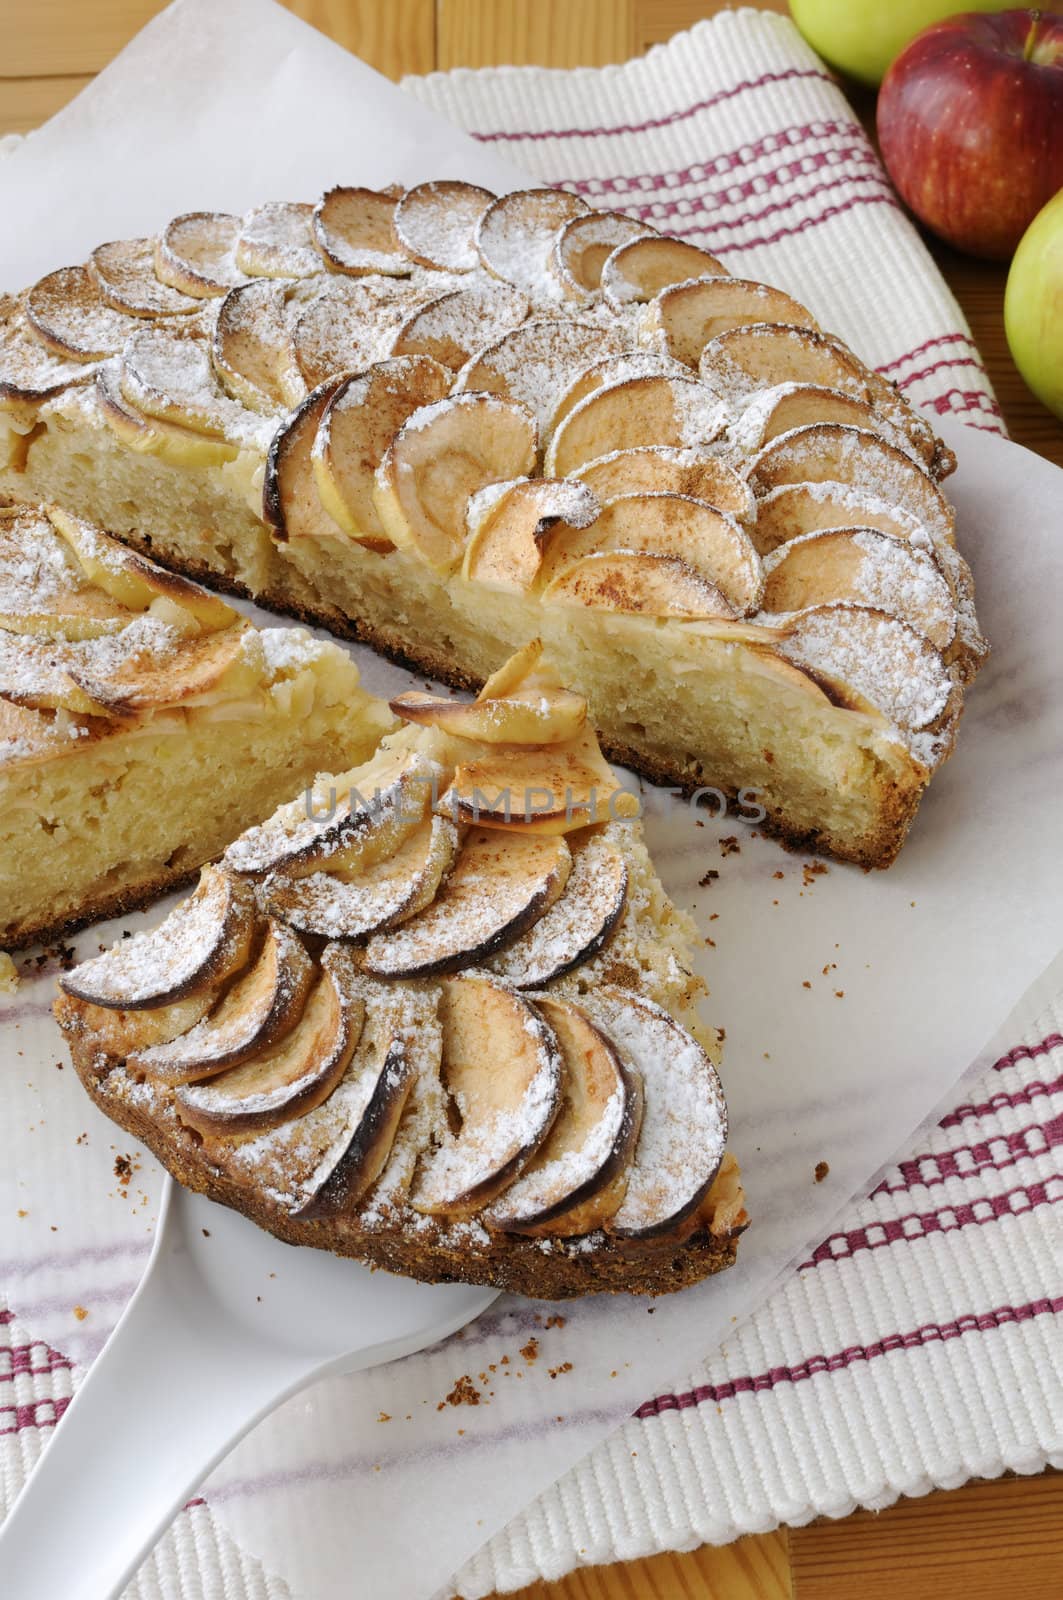 Pie with apples and cinnamon by Apolonia